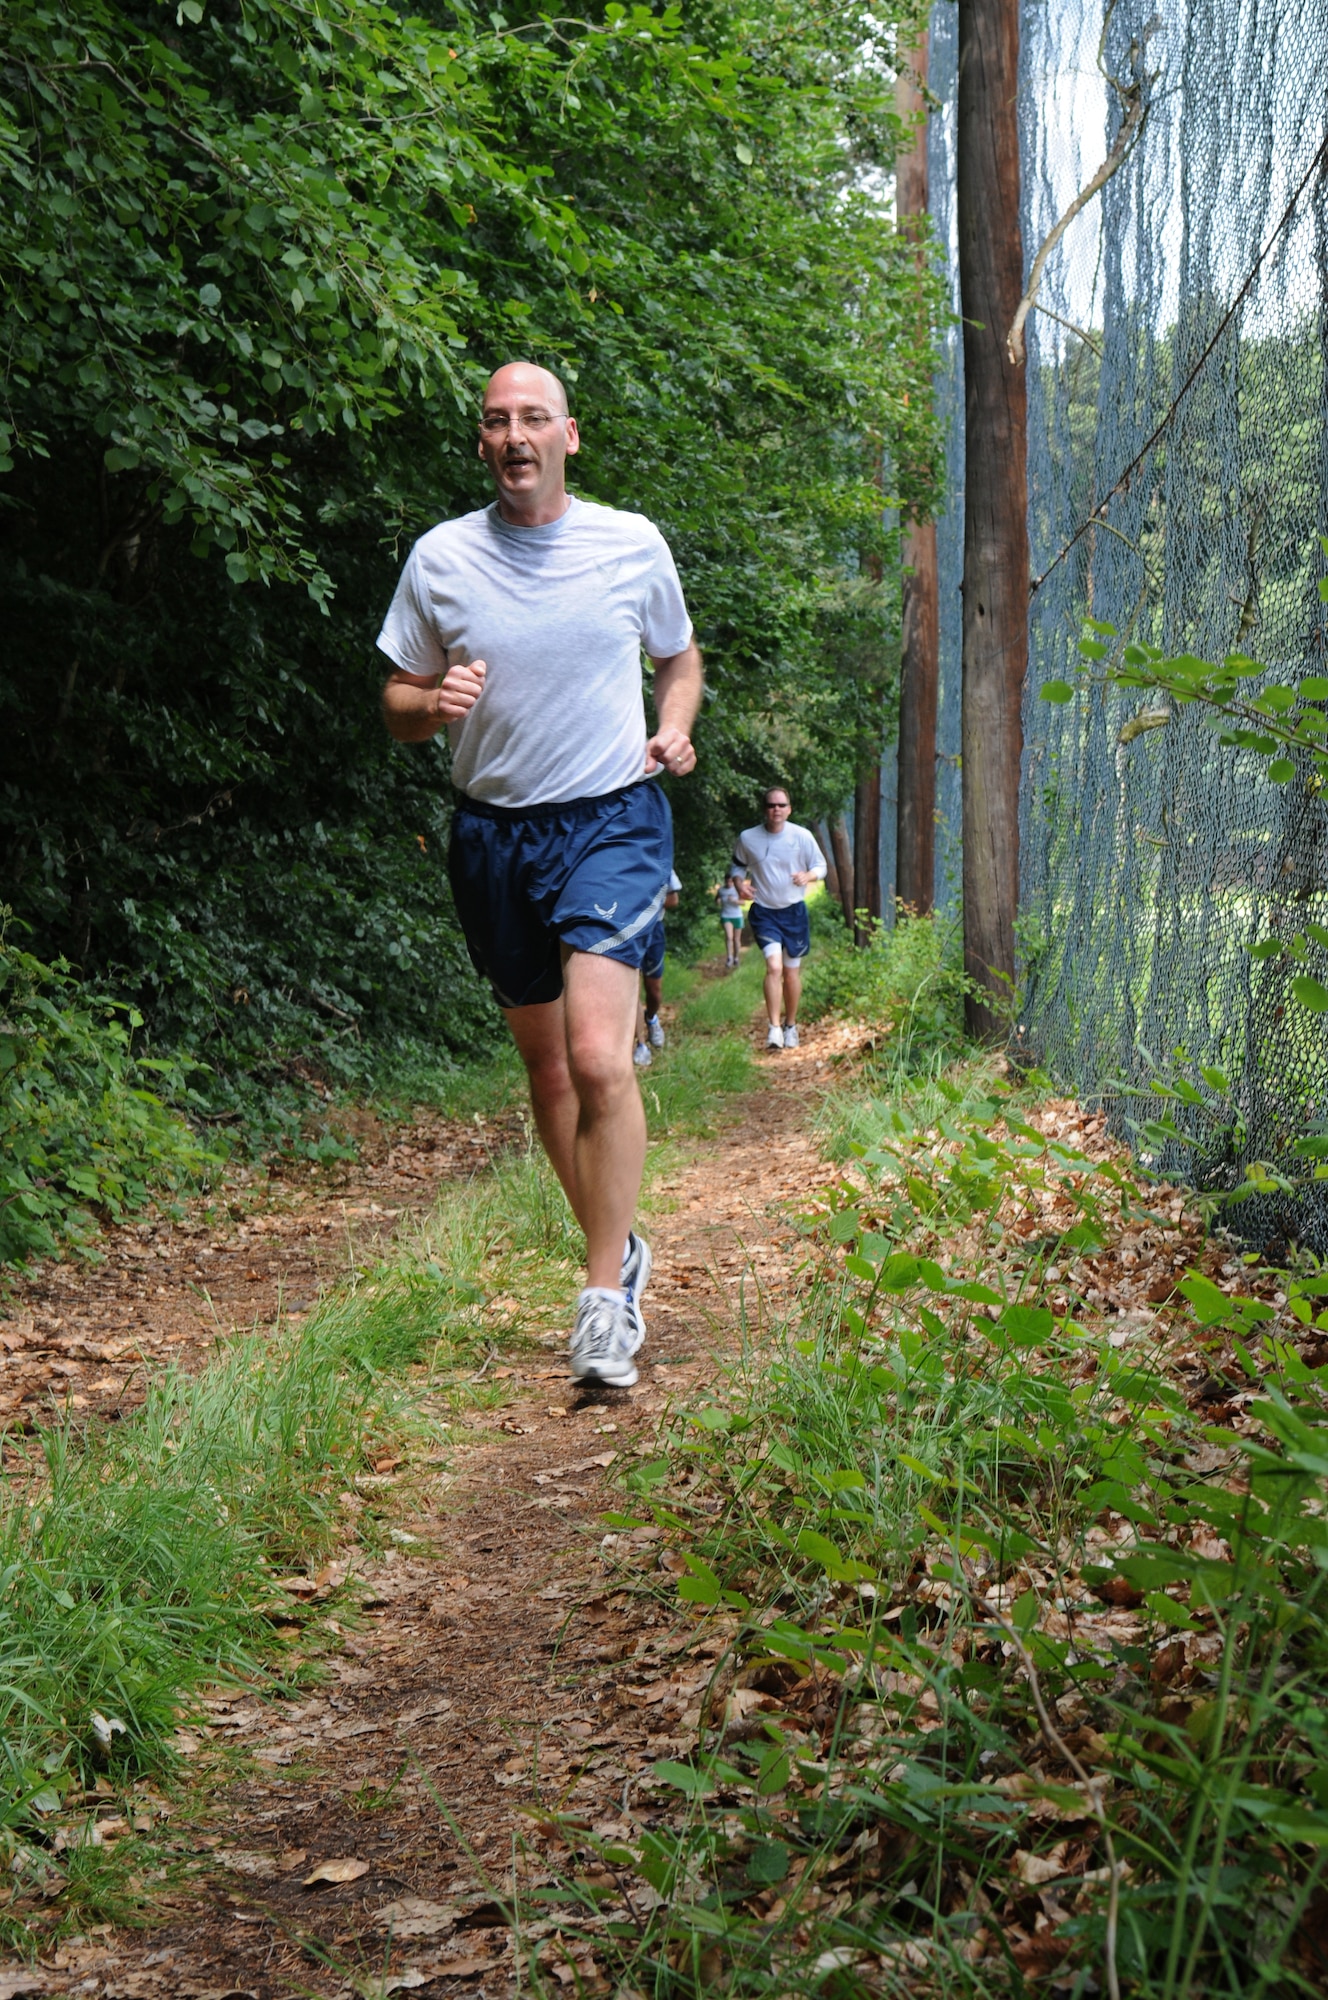 Chief Master Sgt. Mitchell Stippel, 435th Air Base Wing command chief, finishes up running on the newly finished 10 kilometer trail, Ramstein Air Base, Germany, June 9, 2009. (U.S. Air Force photo by Staff Sgt. Levi Riendeau)